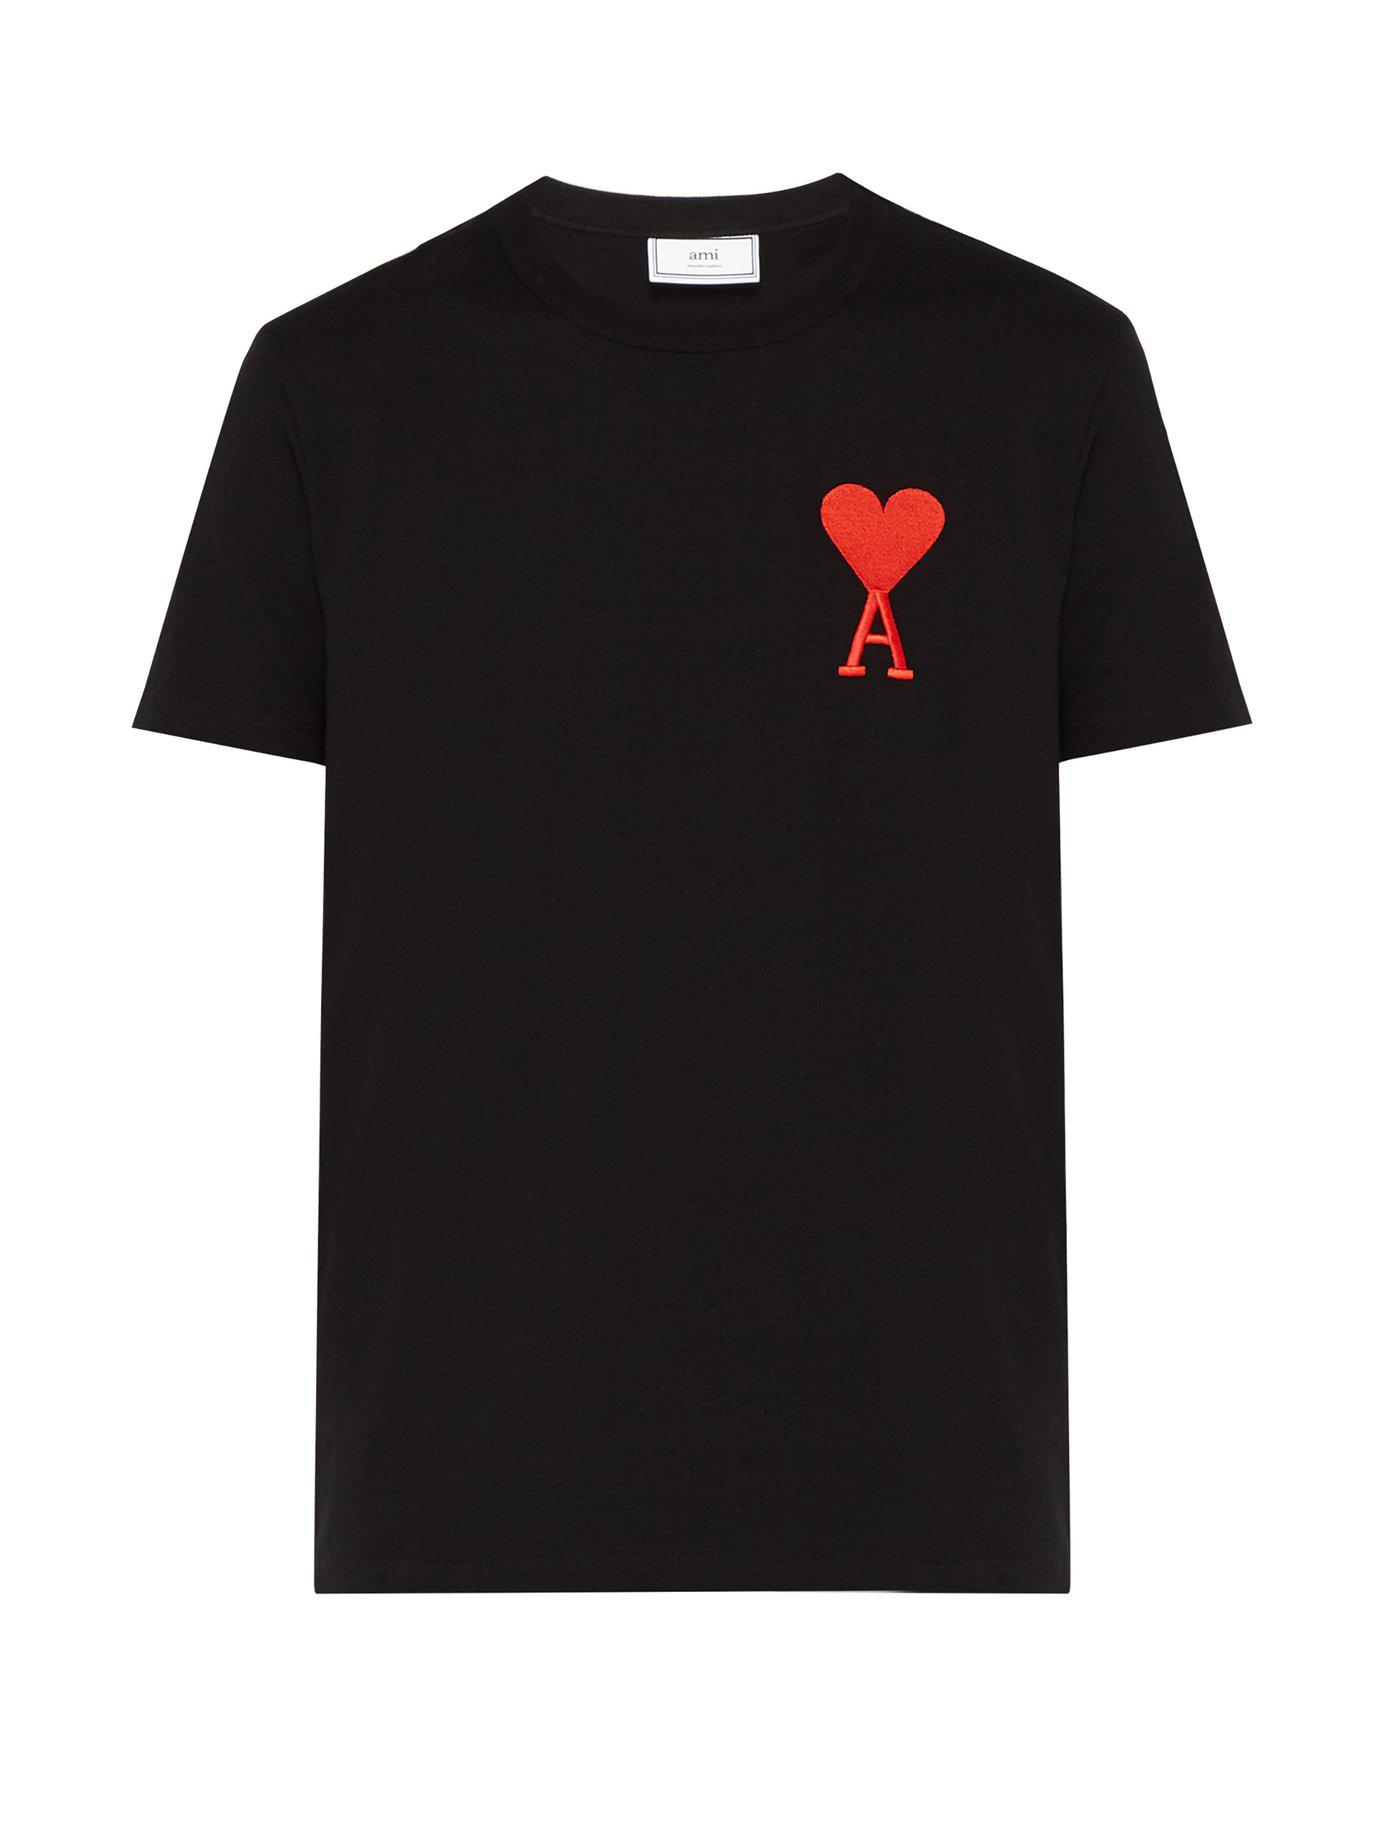 AMI Embroidered Heart Logo Cotton T Shirt in Black for Men - Lyst